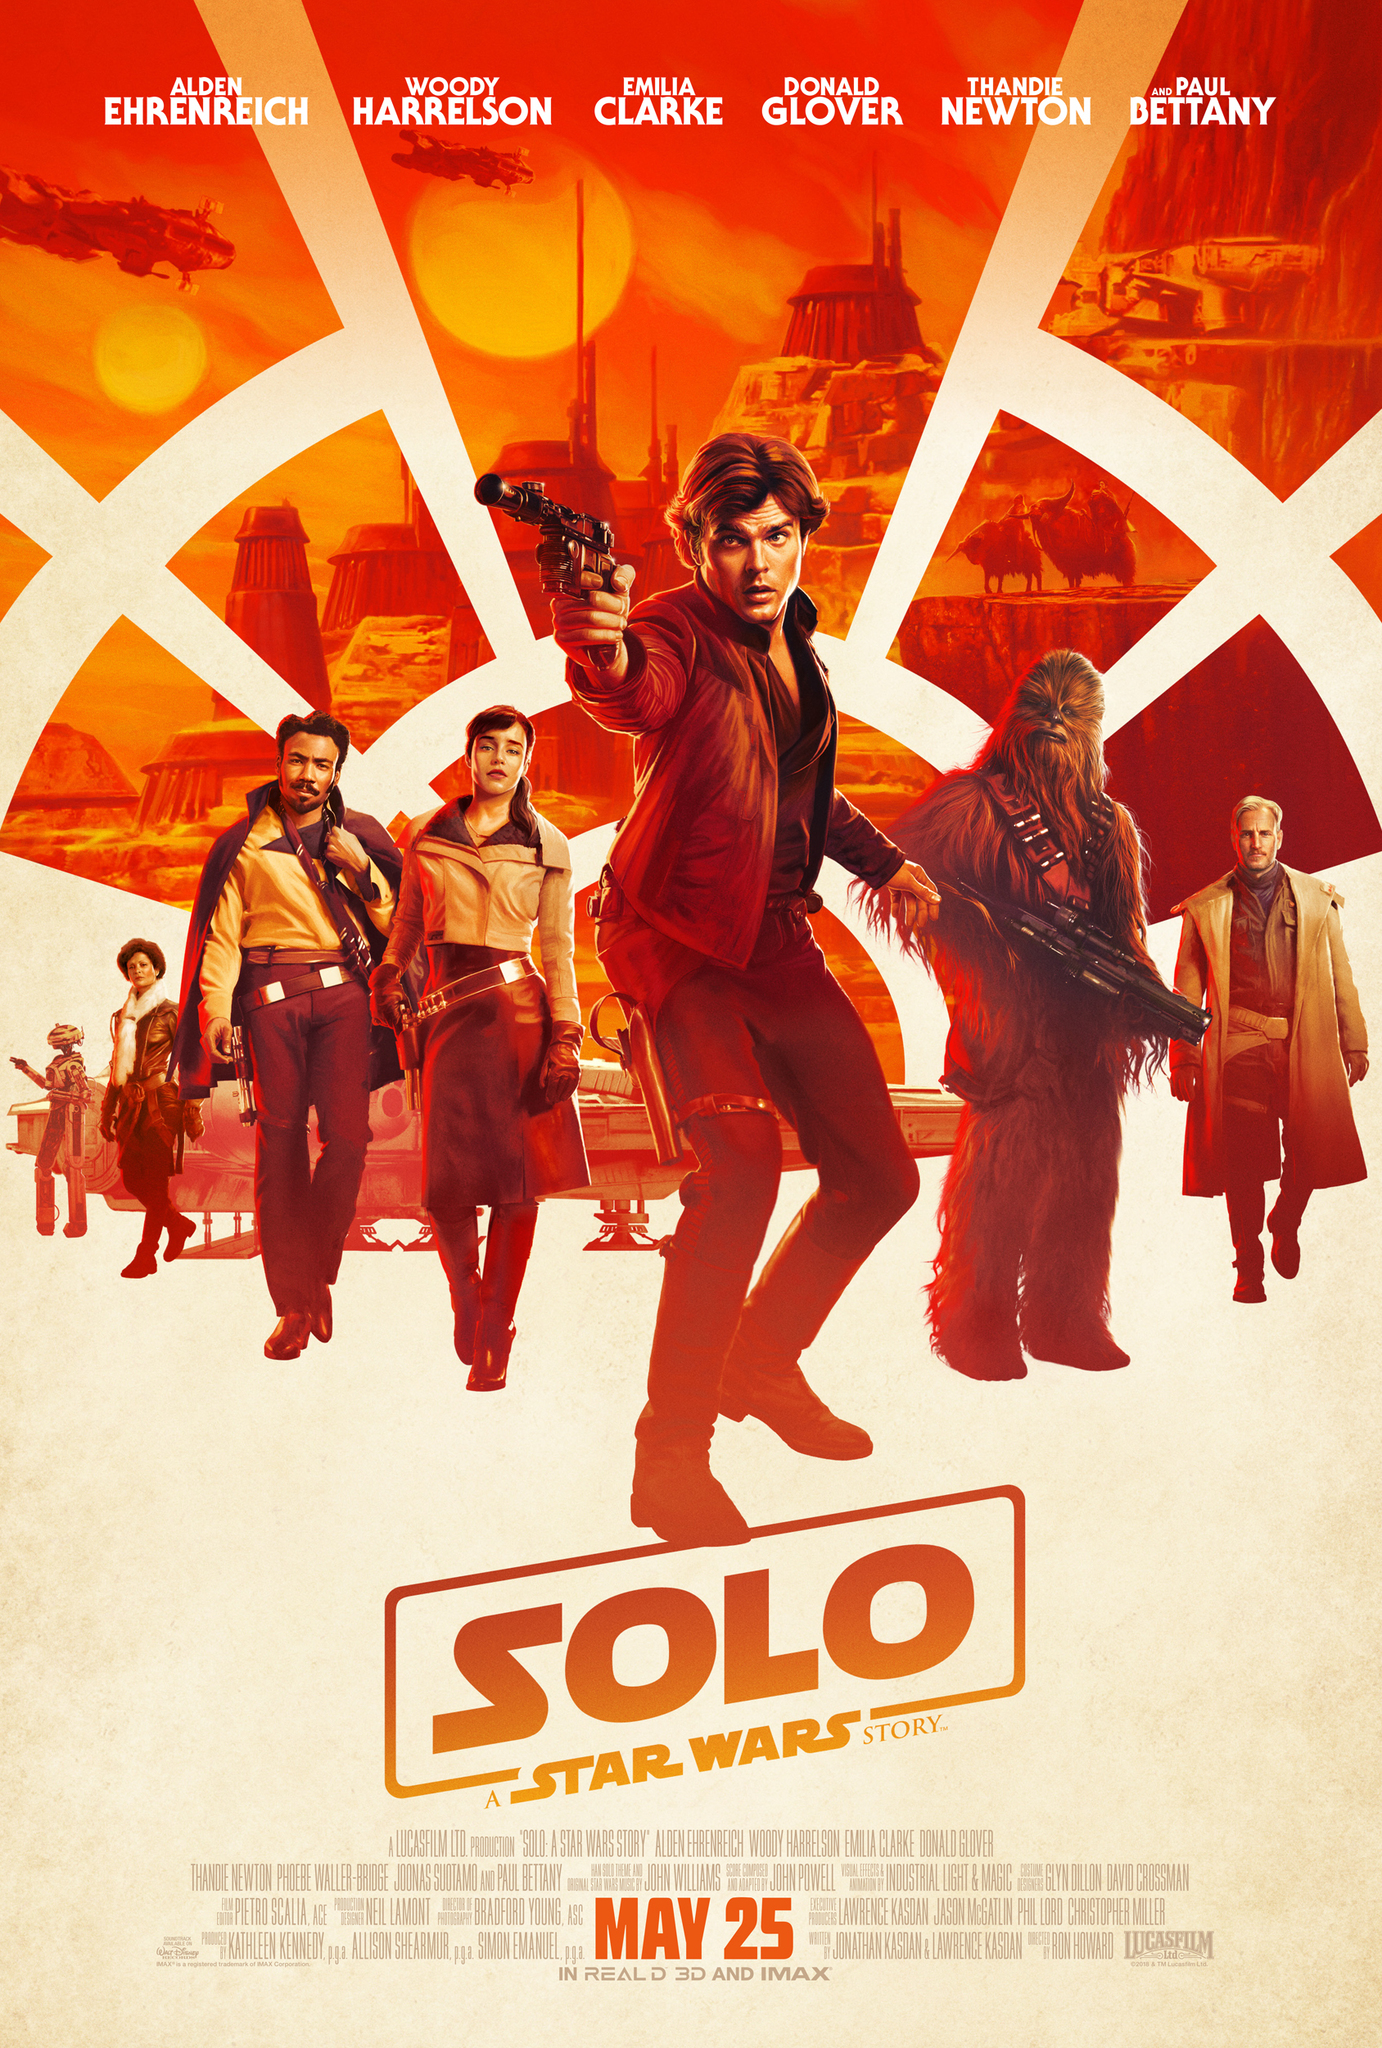 Star Wars Solo movie poster